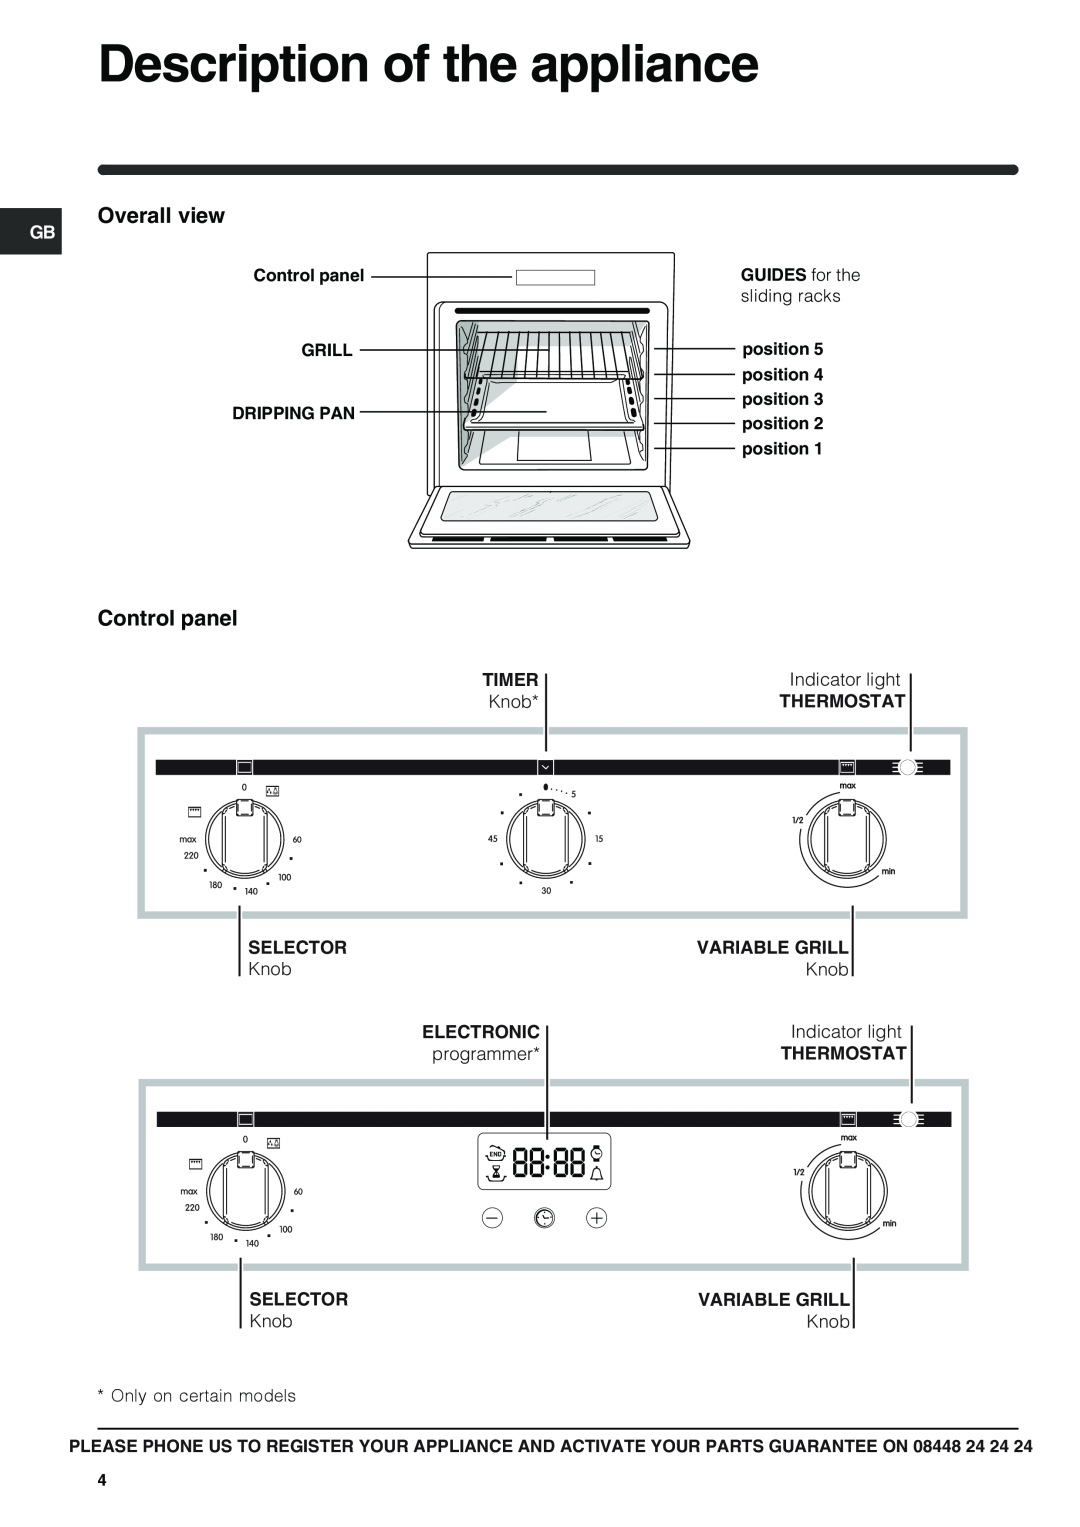 Indesit BIM 31 K.A B IX GB, FIM 33 K.A IX GB, FIM 33 K.A GB Description of the appliance, Overall view, Control panel 